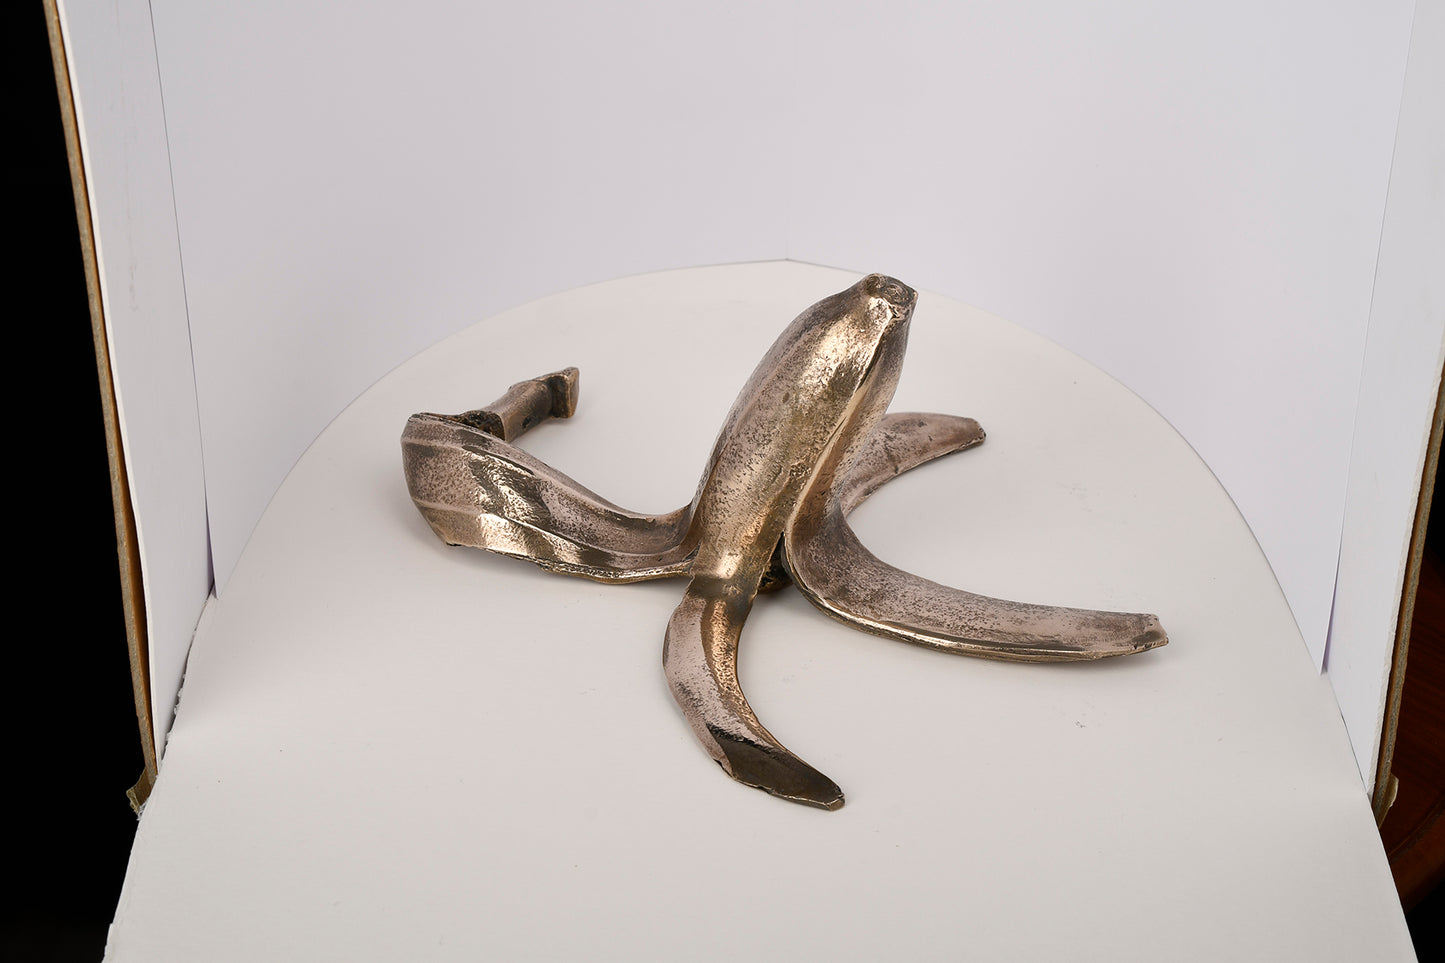 Banana by James Howden